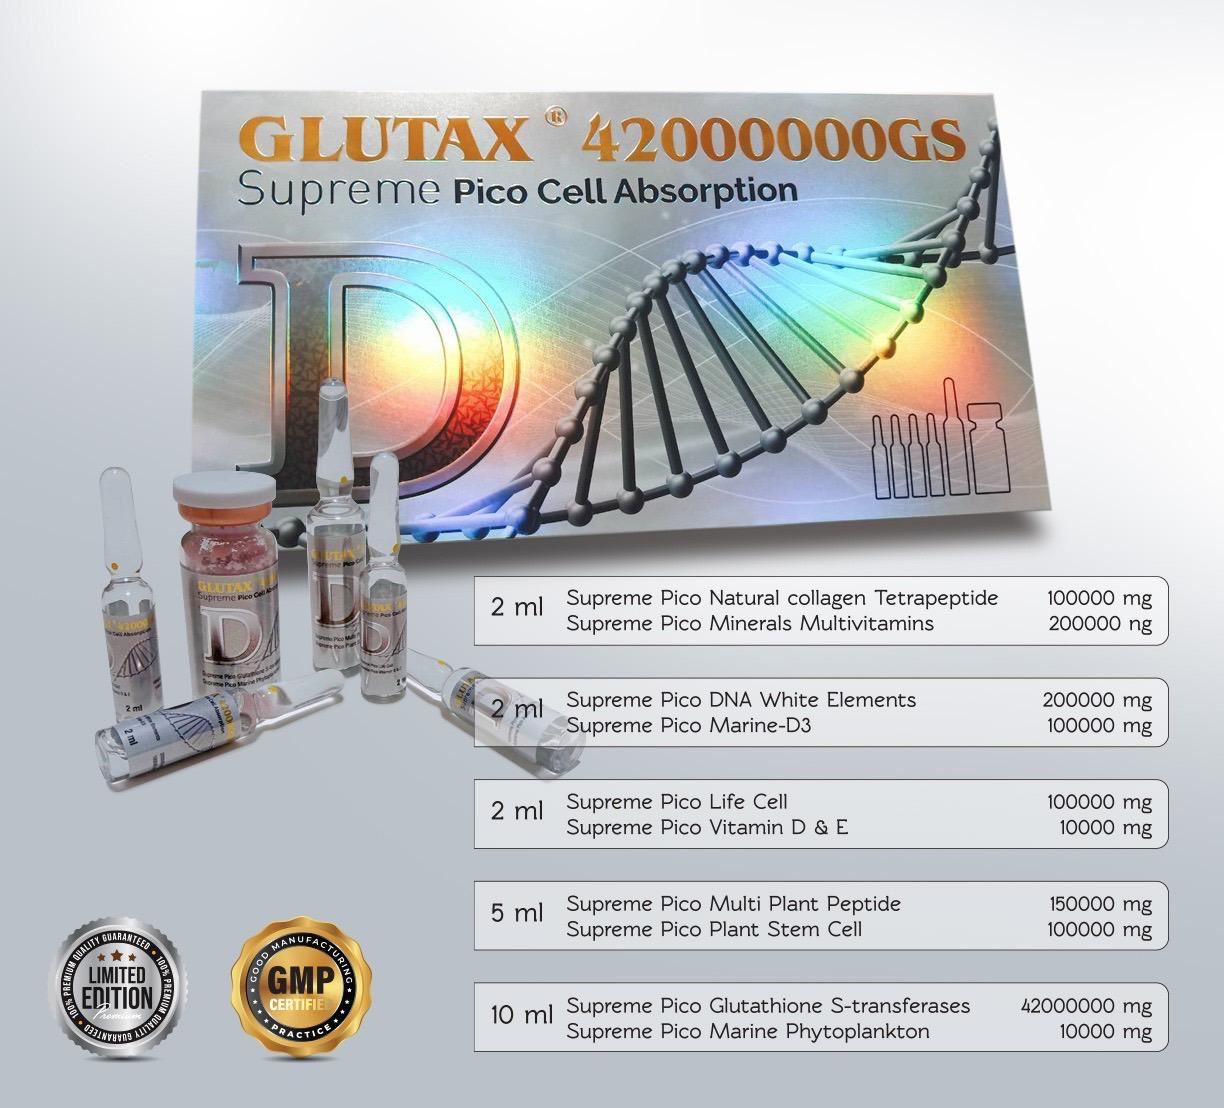 Glutax 42000000gs Supreme Pico Cell Glutathione Skin Whitening Injection reviews